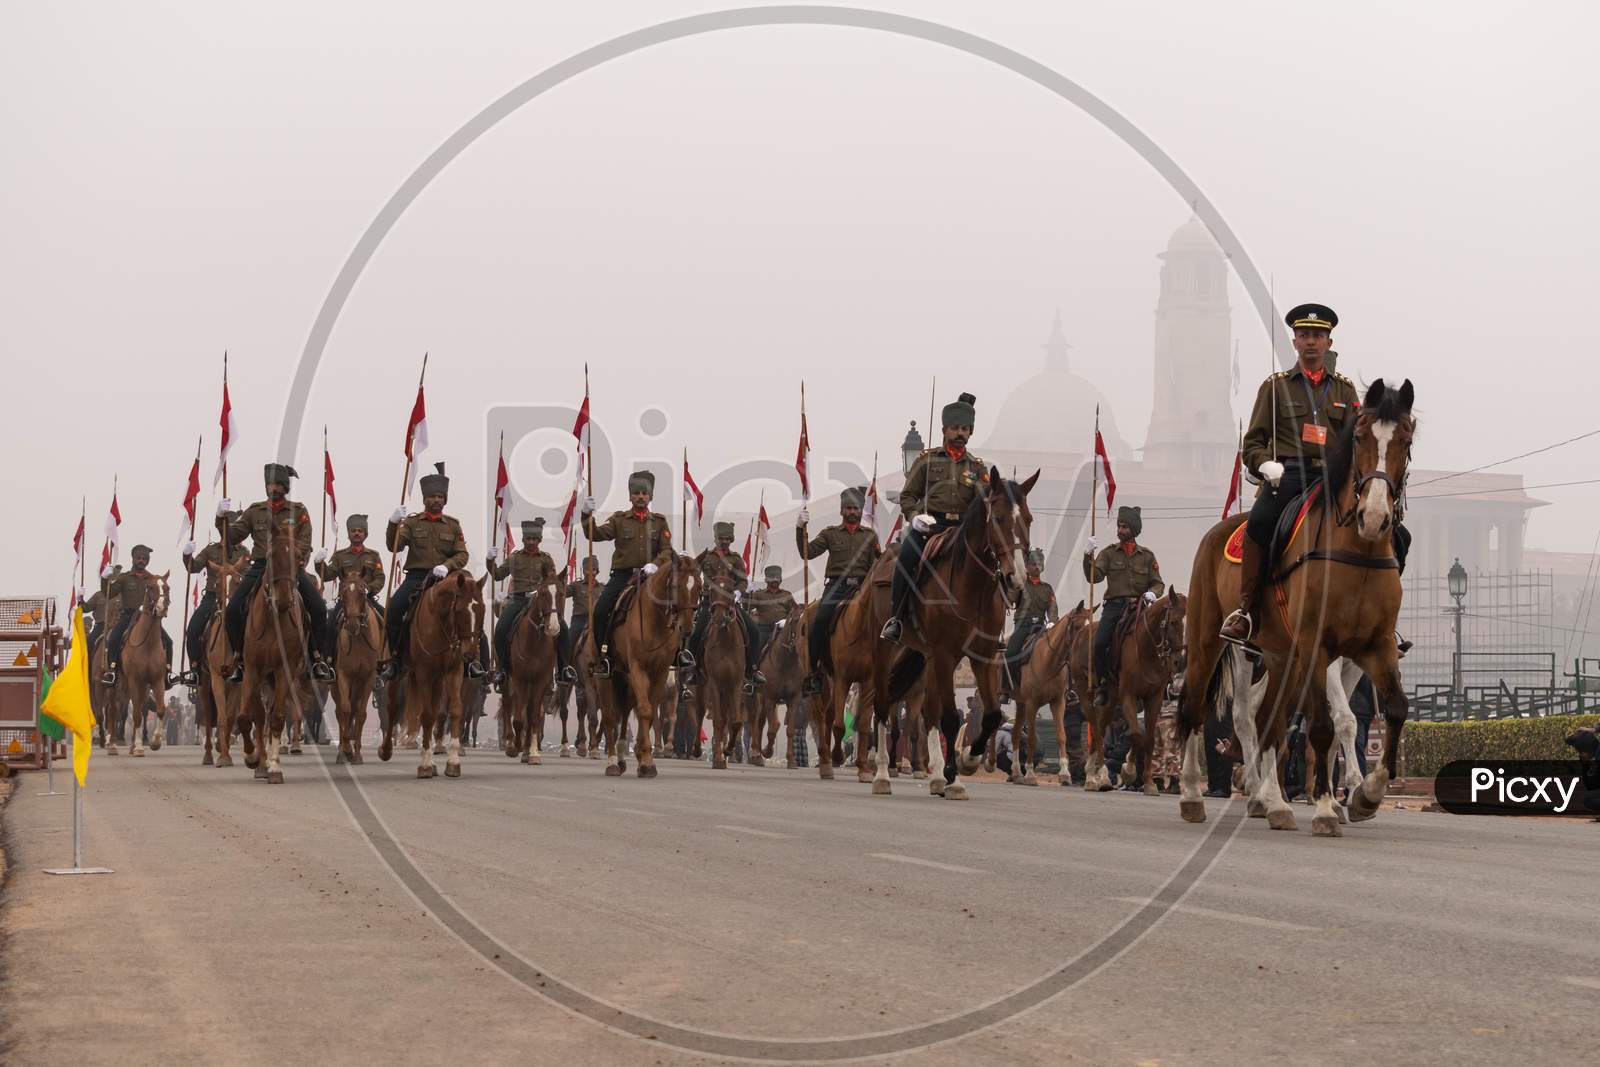 Indian Army Horse Regiment Practicing for Republic Day Parade, Delhi